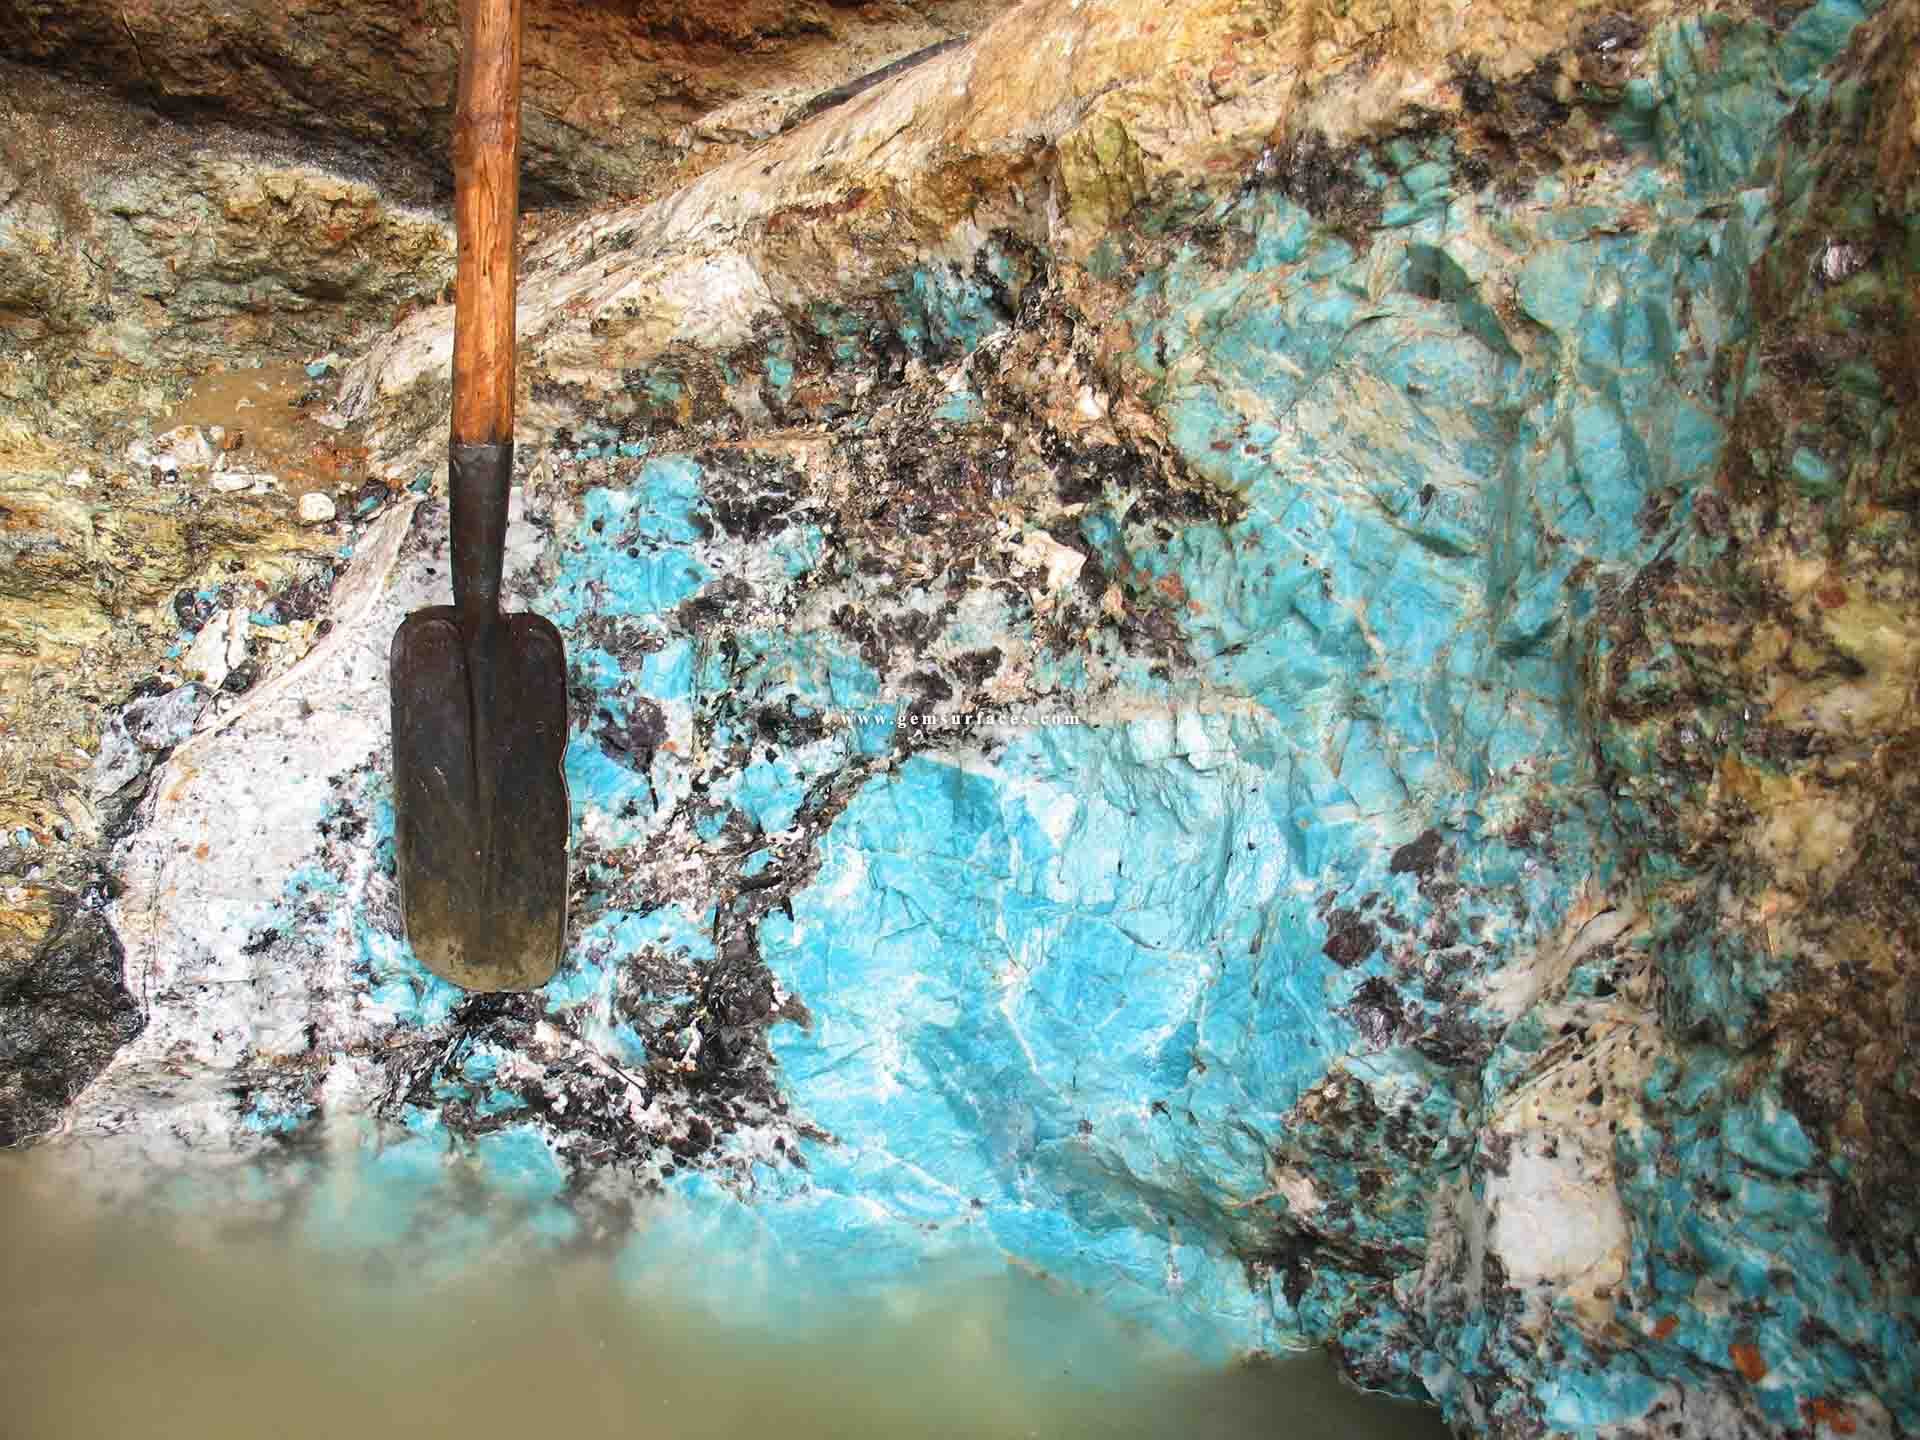 Picture of an amazonite mine.